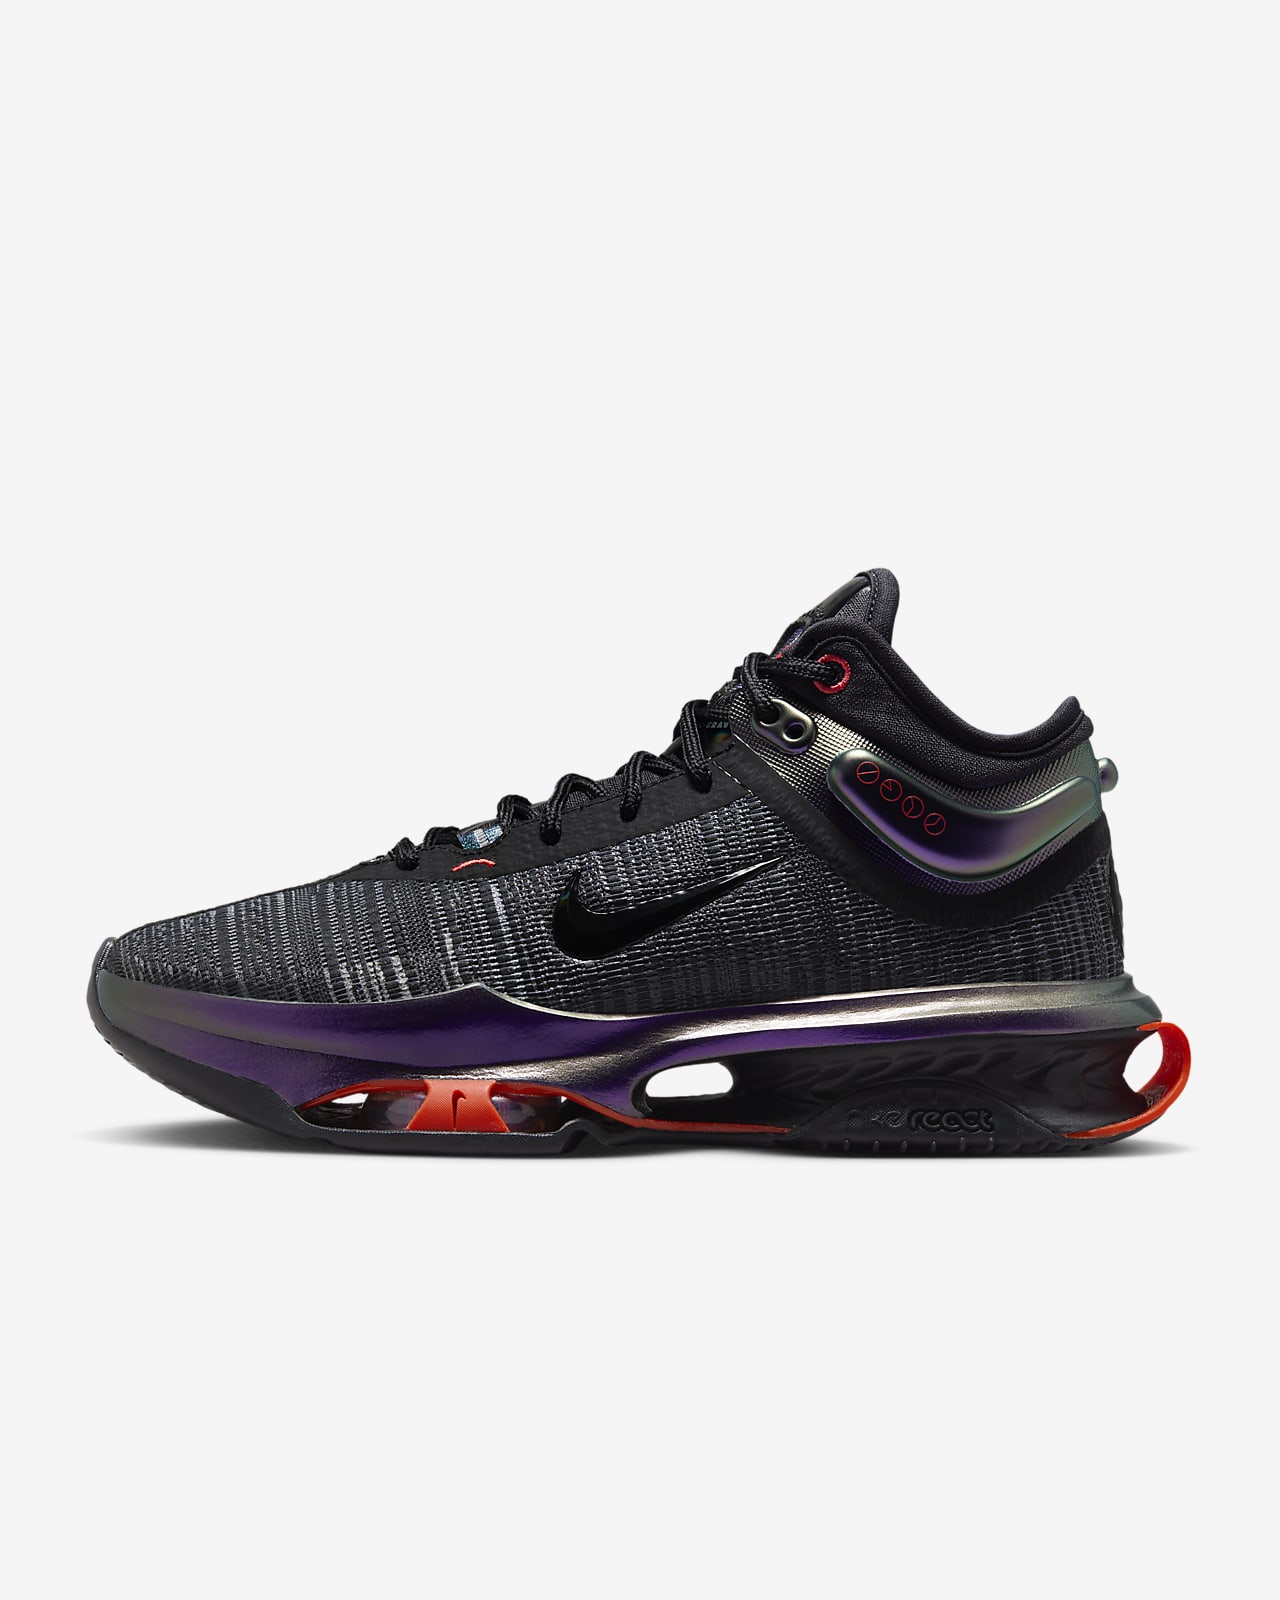 Buy Nike Adult Unisex Air Max Impact 2 Basketball Shoes  (Anthracite/Black_11 UK_CQ9382-004) at Amazon.in